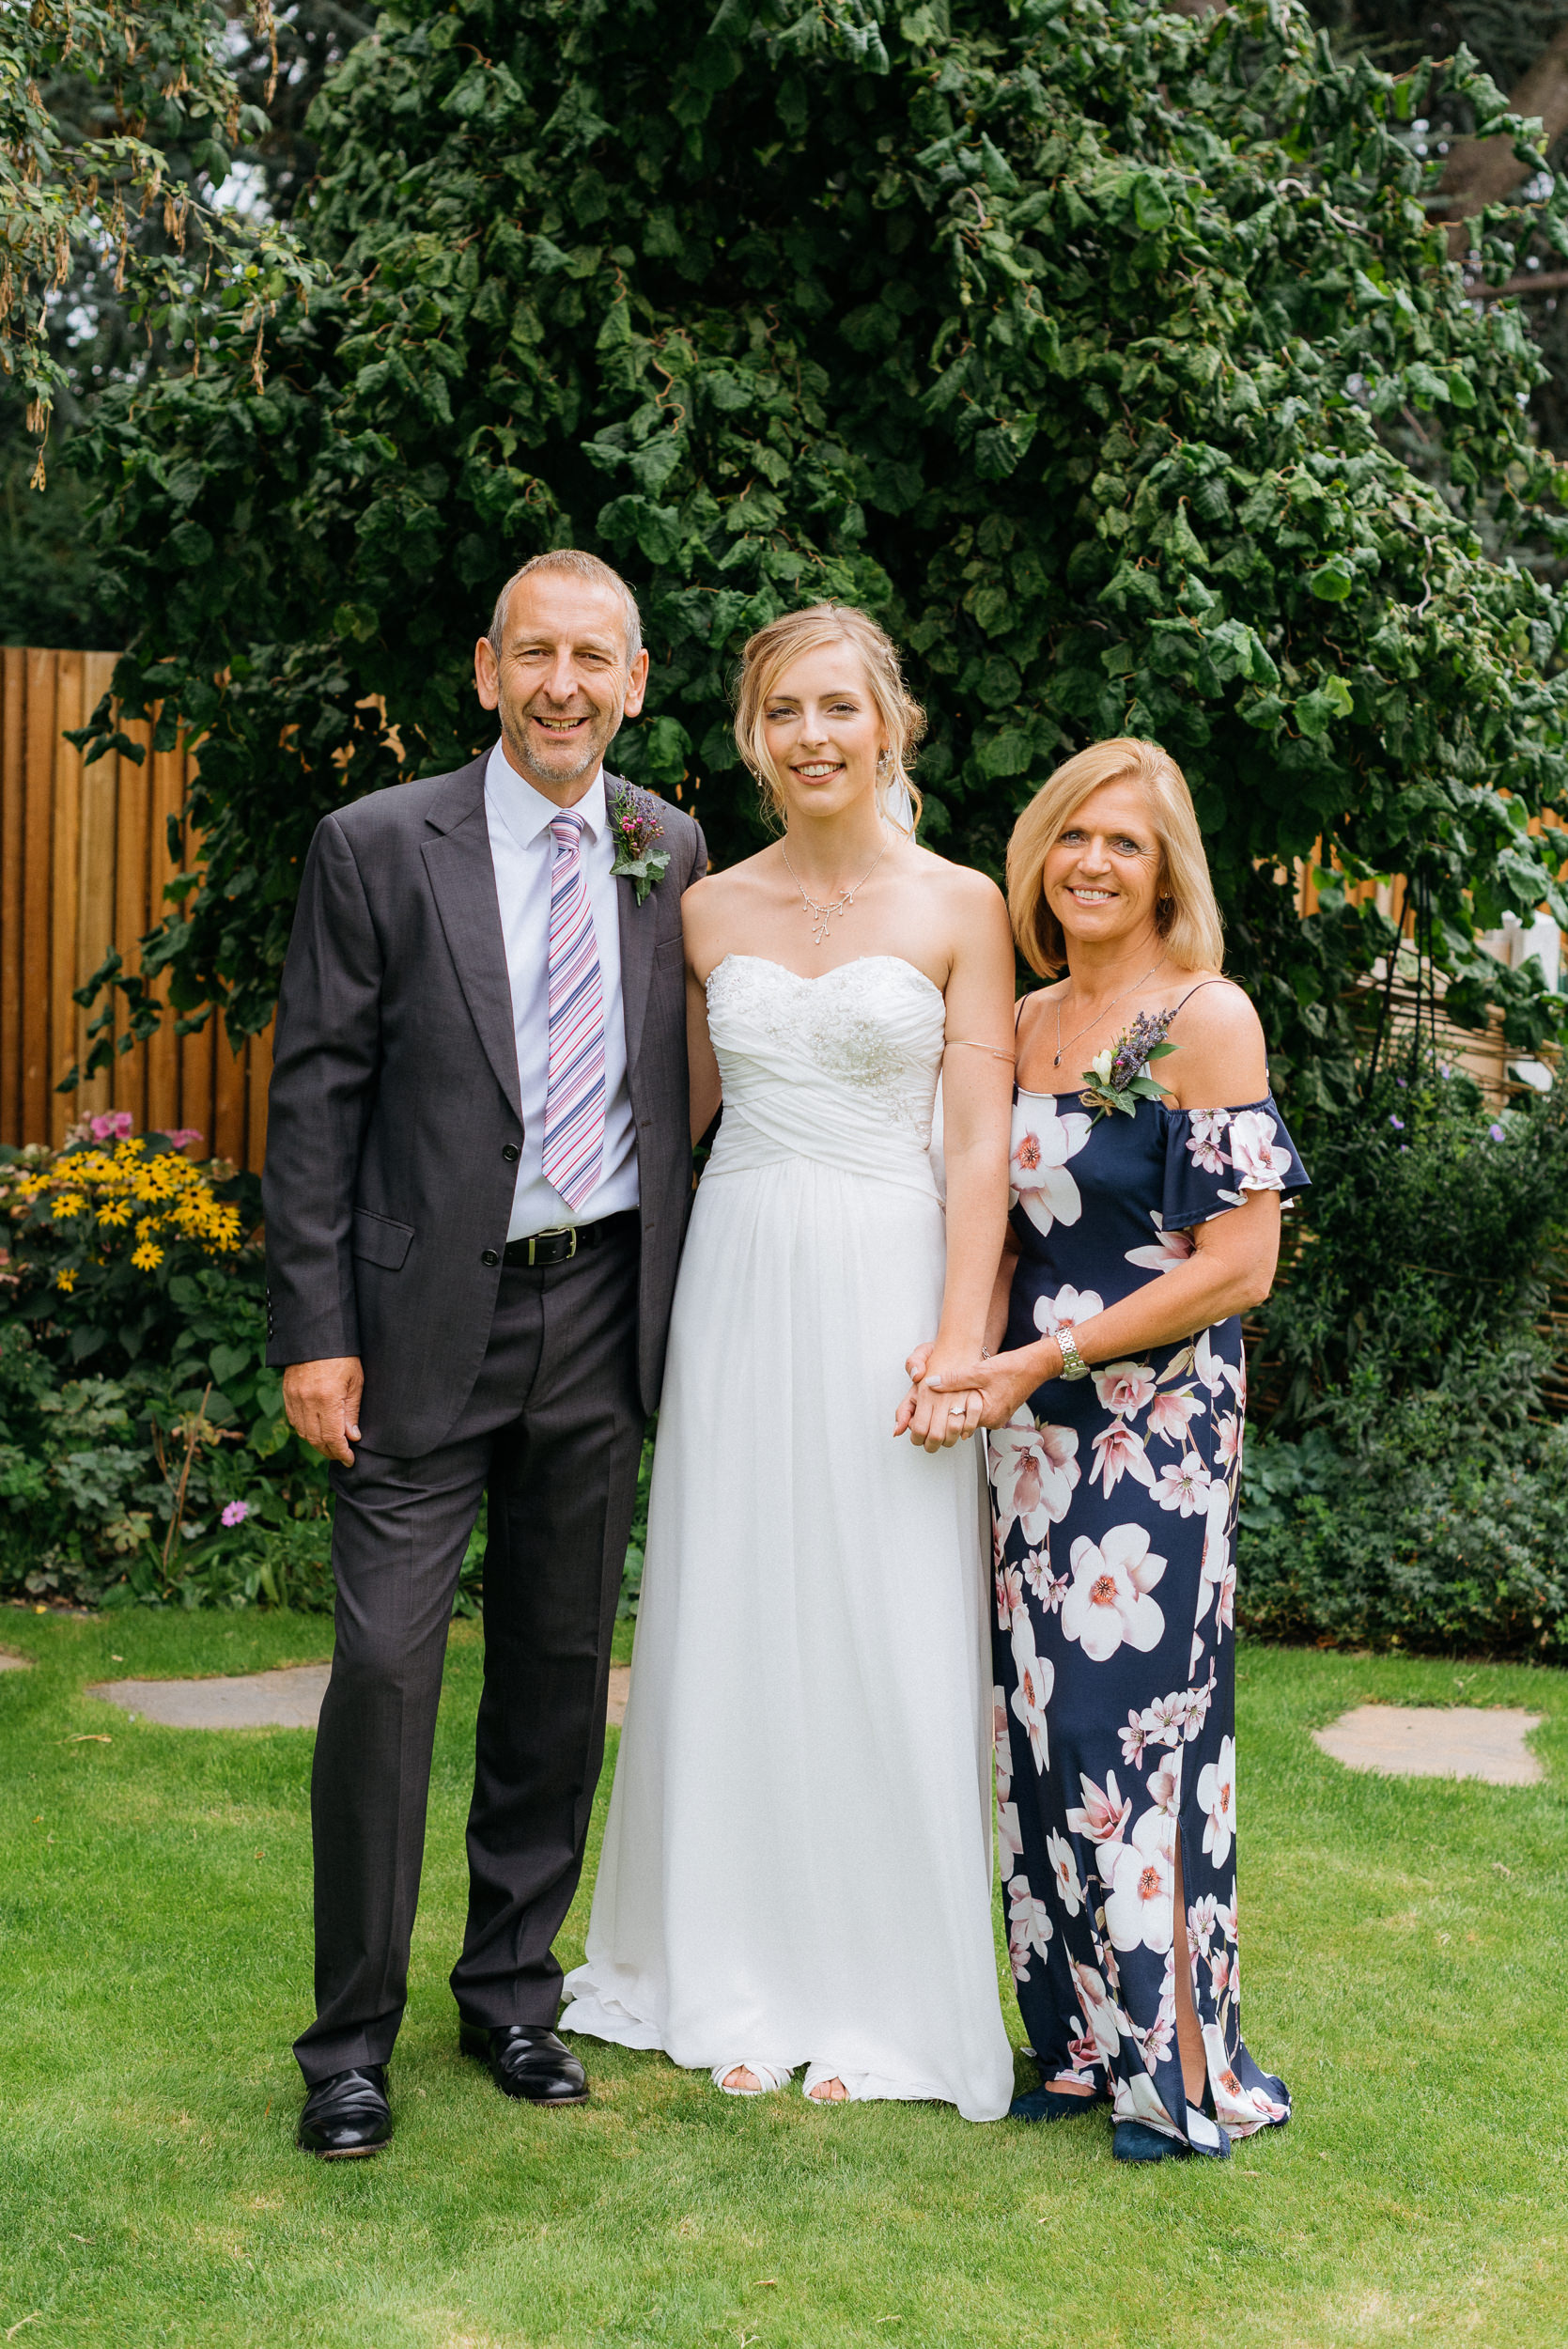 A photograph of the bride with her mother and father